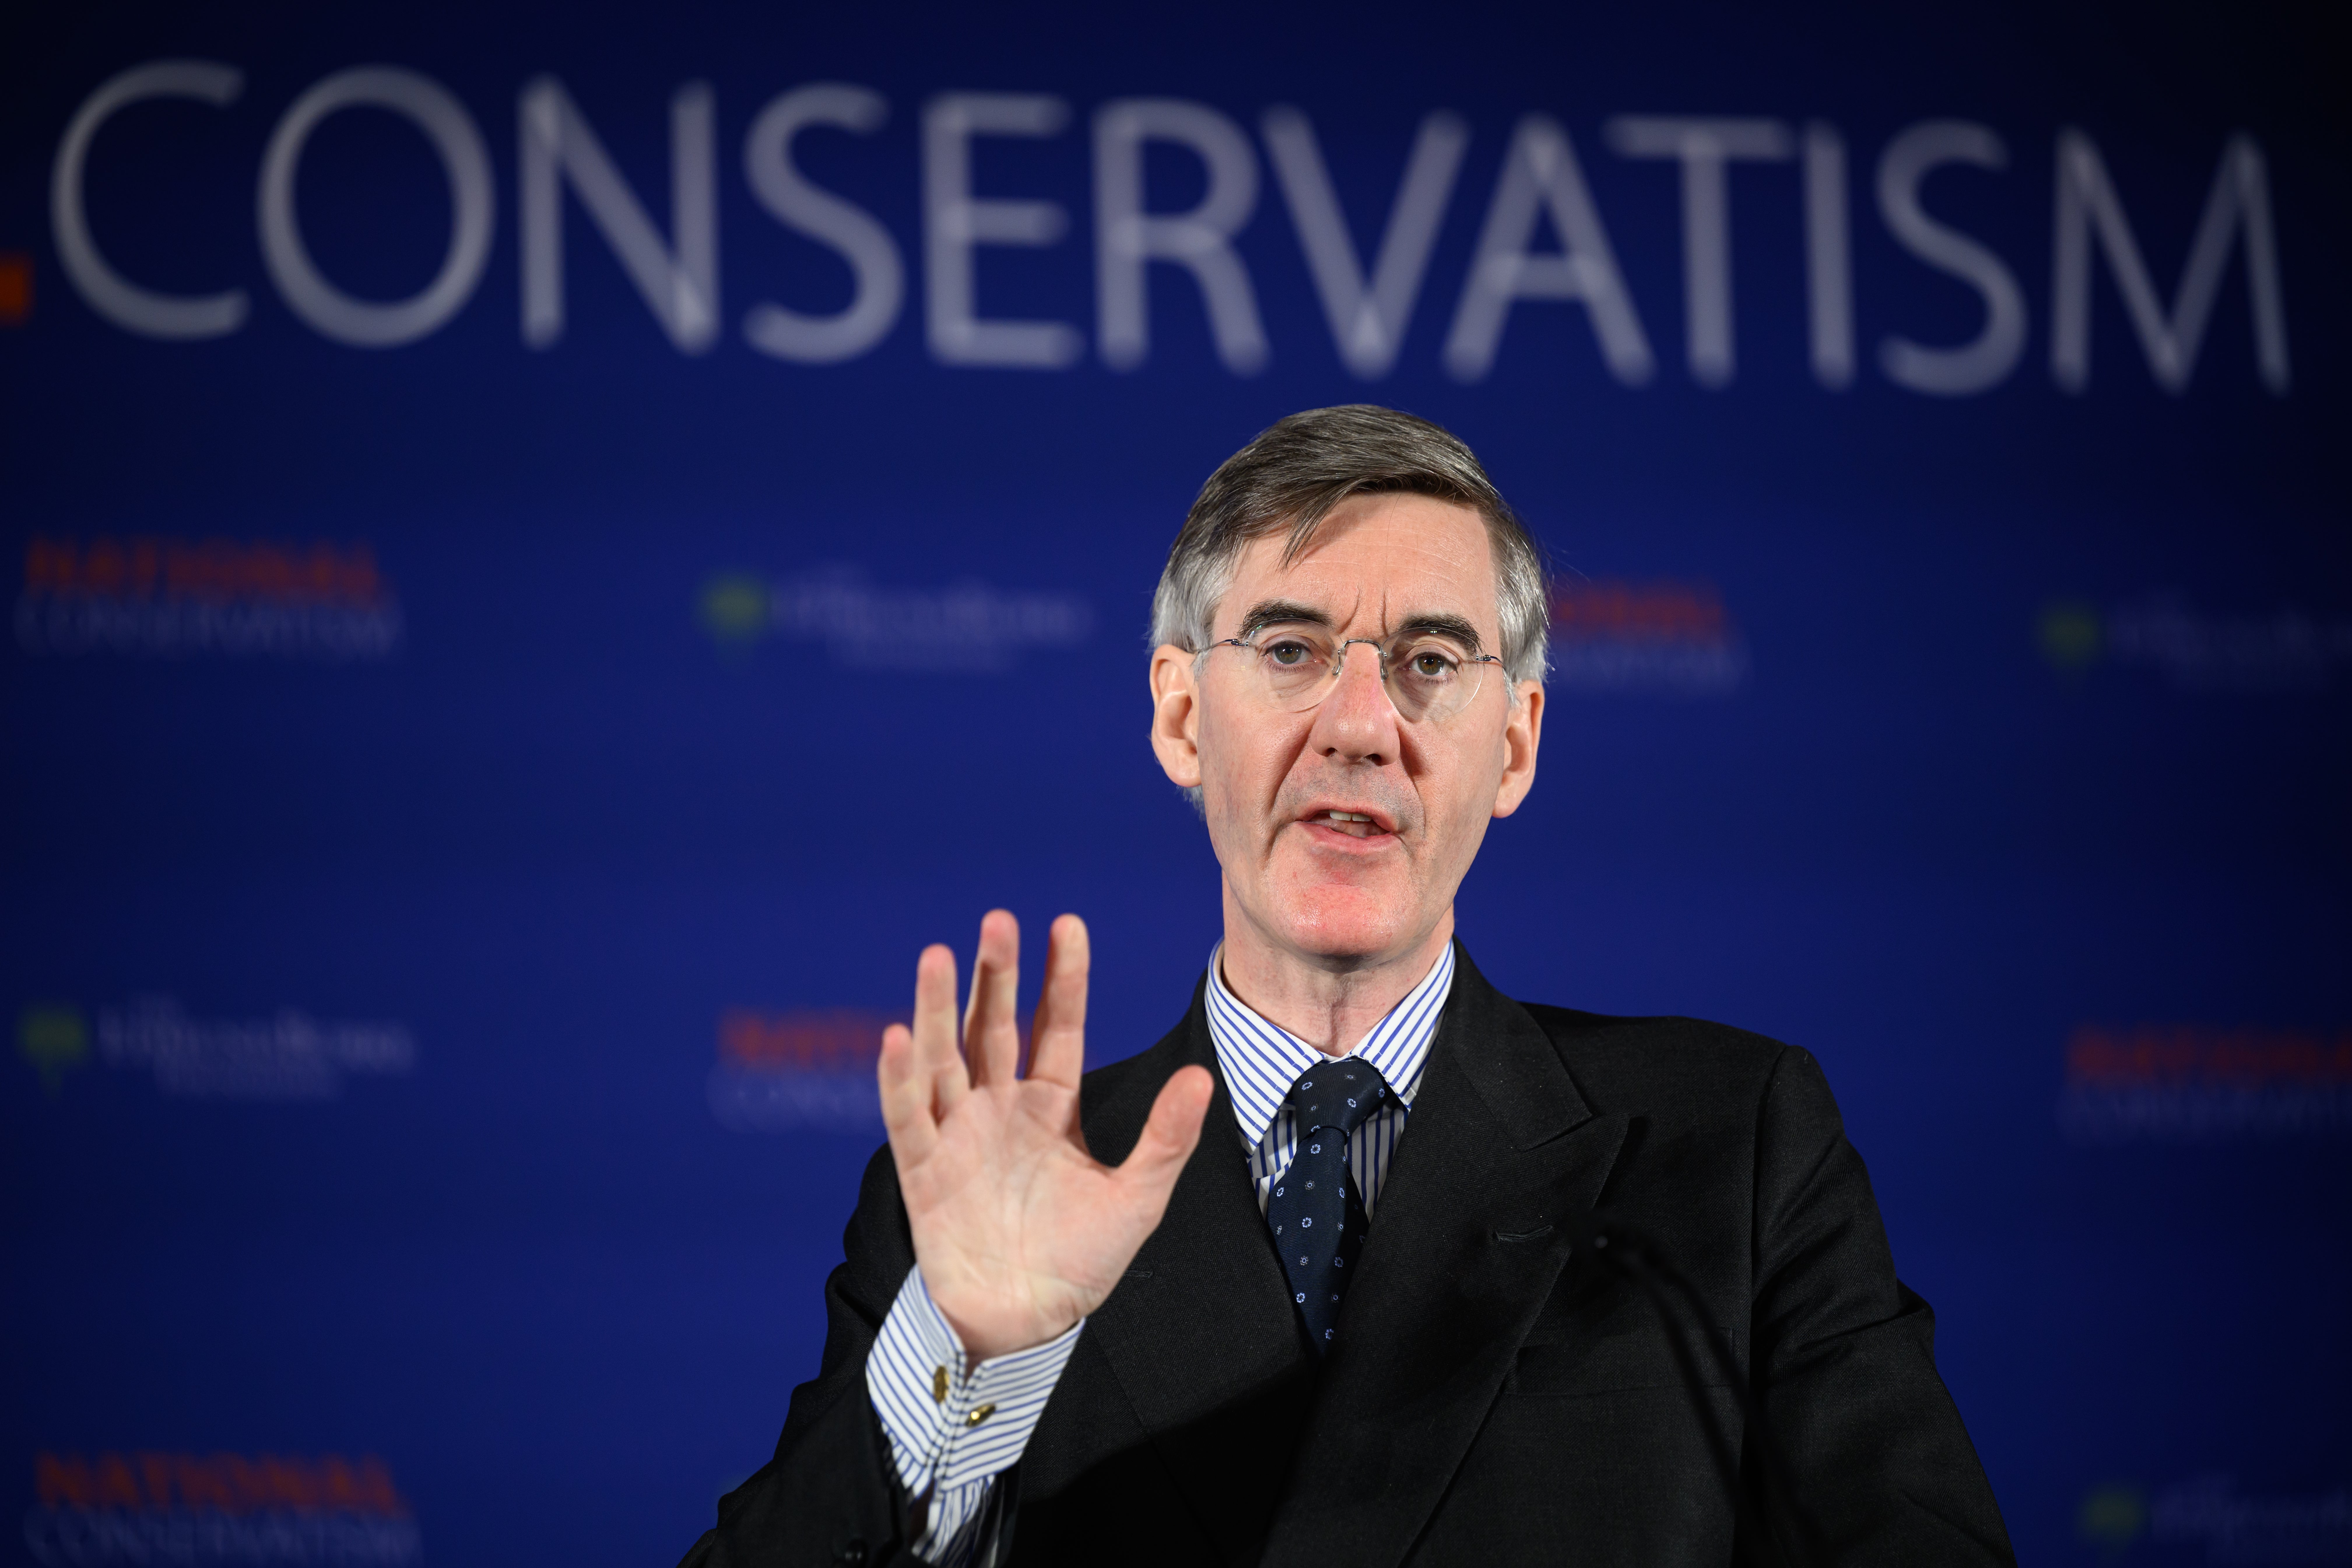 Conservative MP Jacob Rees-Mogg delivers his keynote address during the National Conservatism conference.